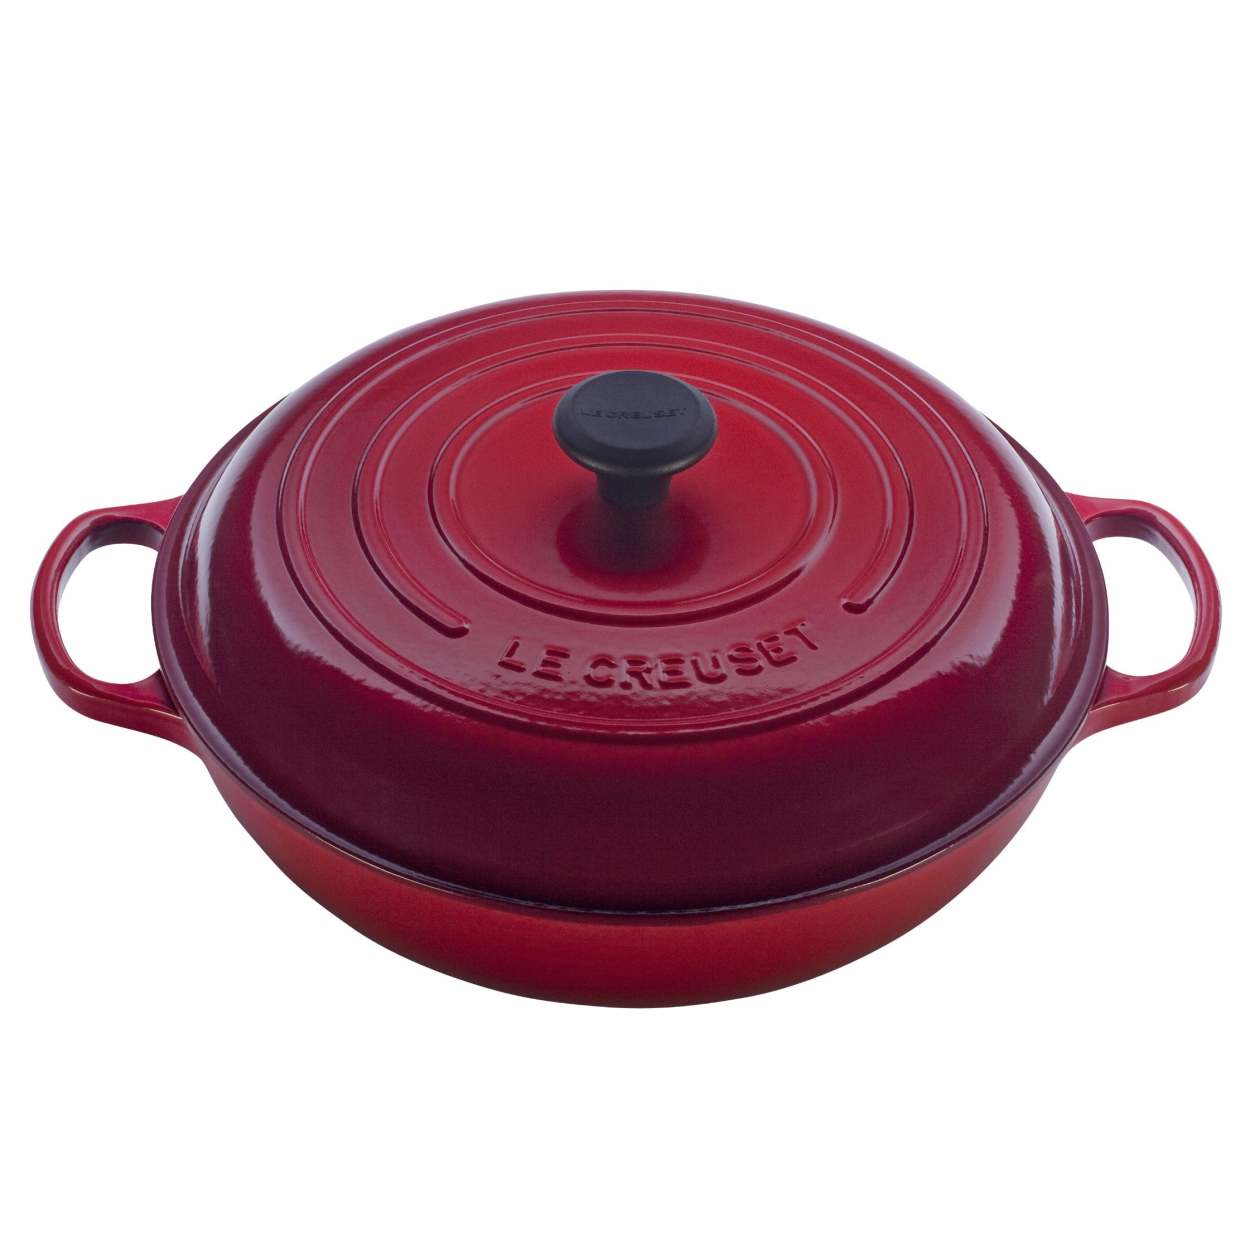 3.5 Qt. Round Signature Dutch Oven with Stainless Steel Knob (Sea Salt), Le Creuset